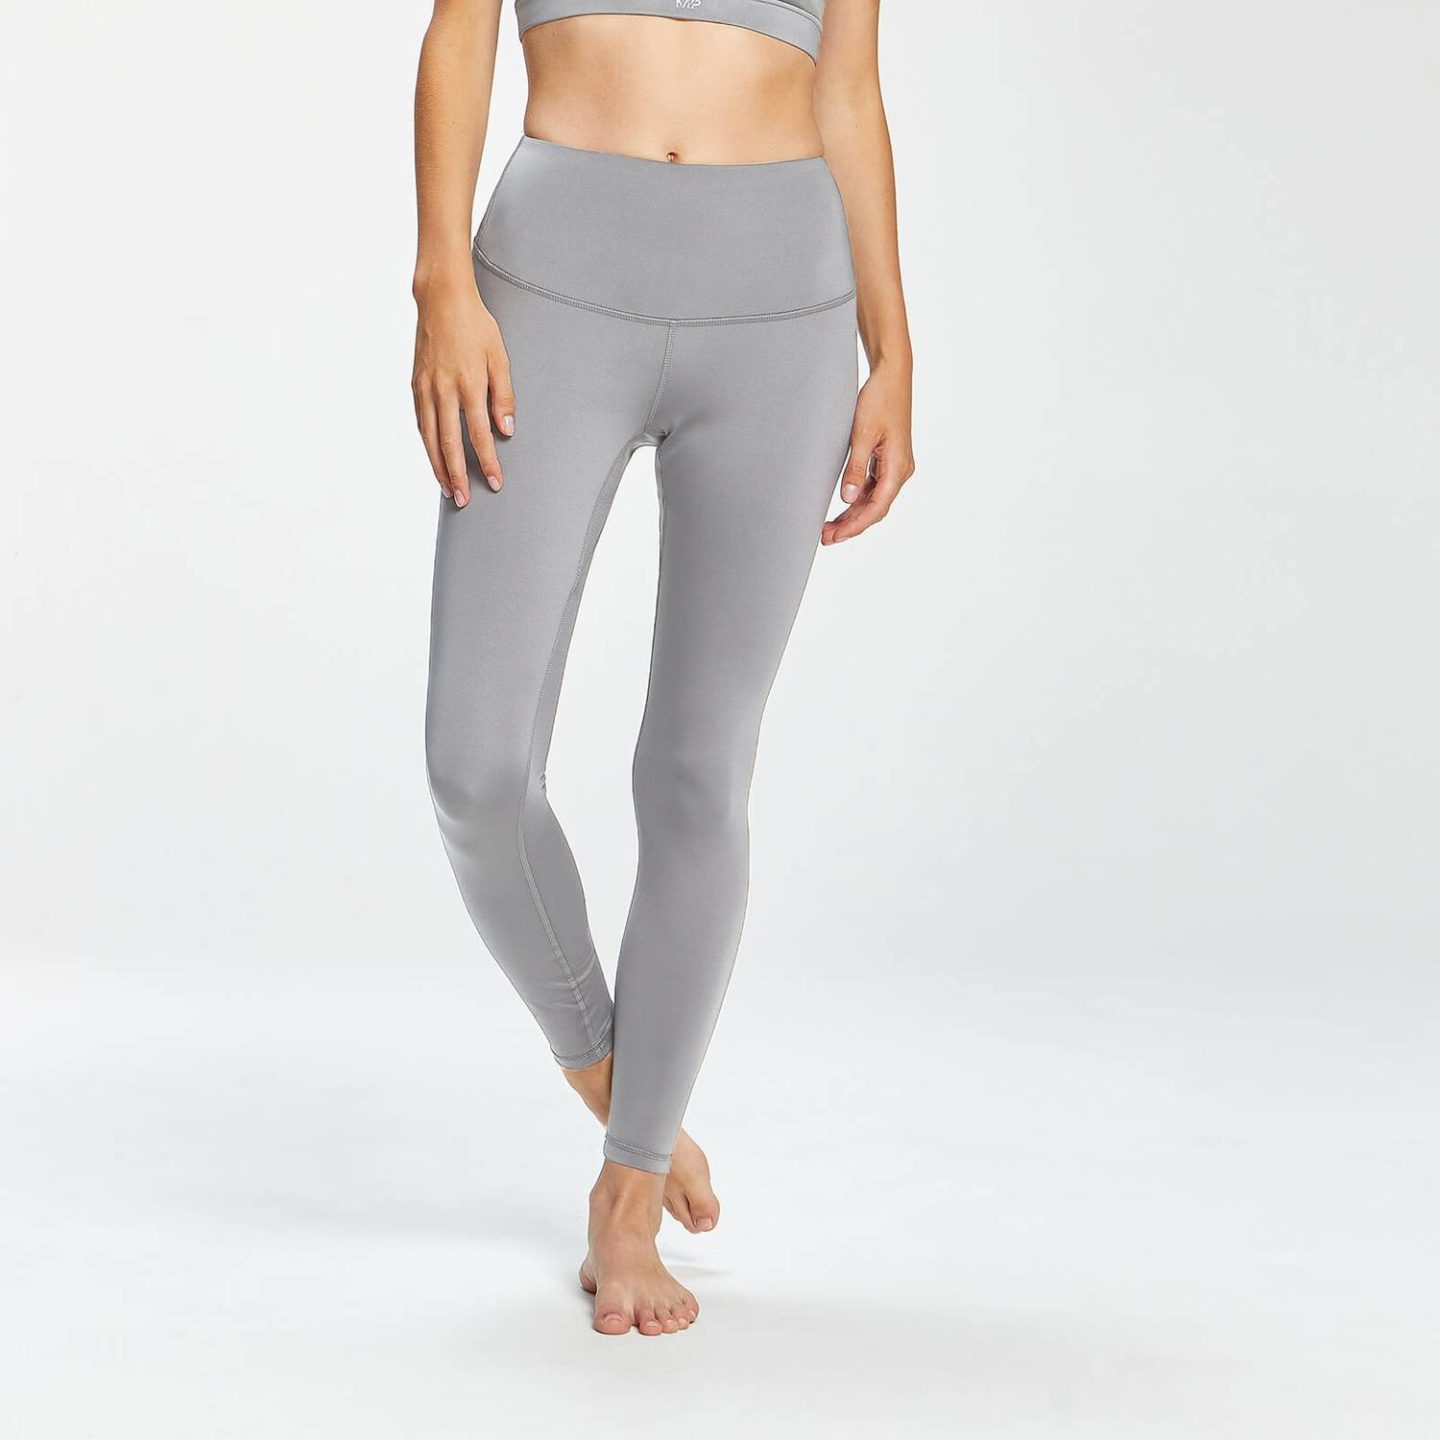 compusure leggings are great for tall girls who like pilates and yoga